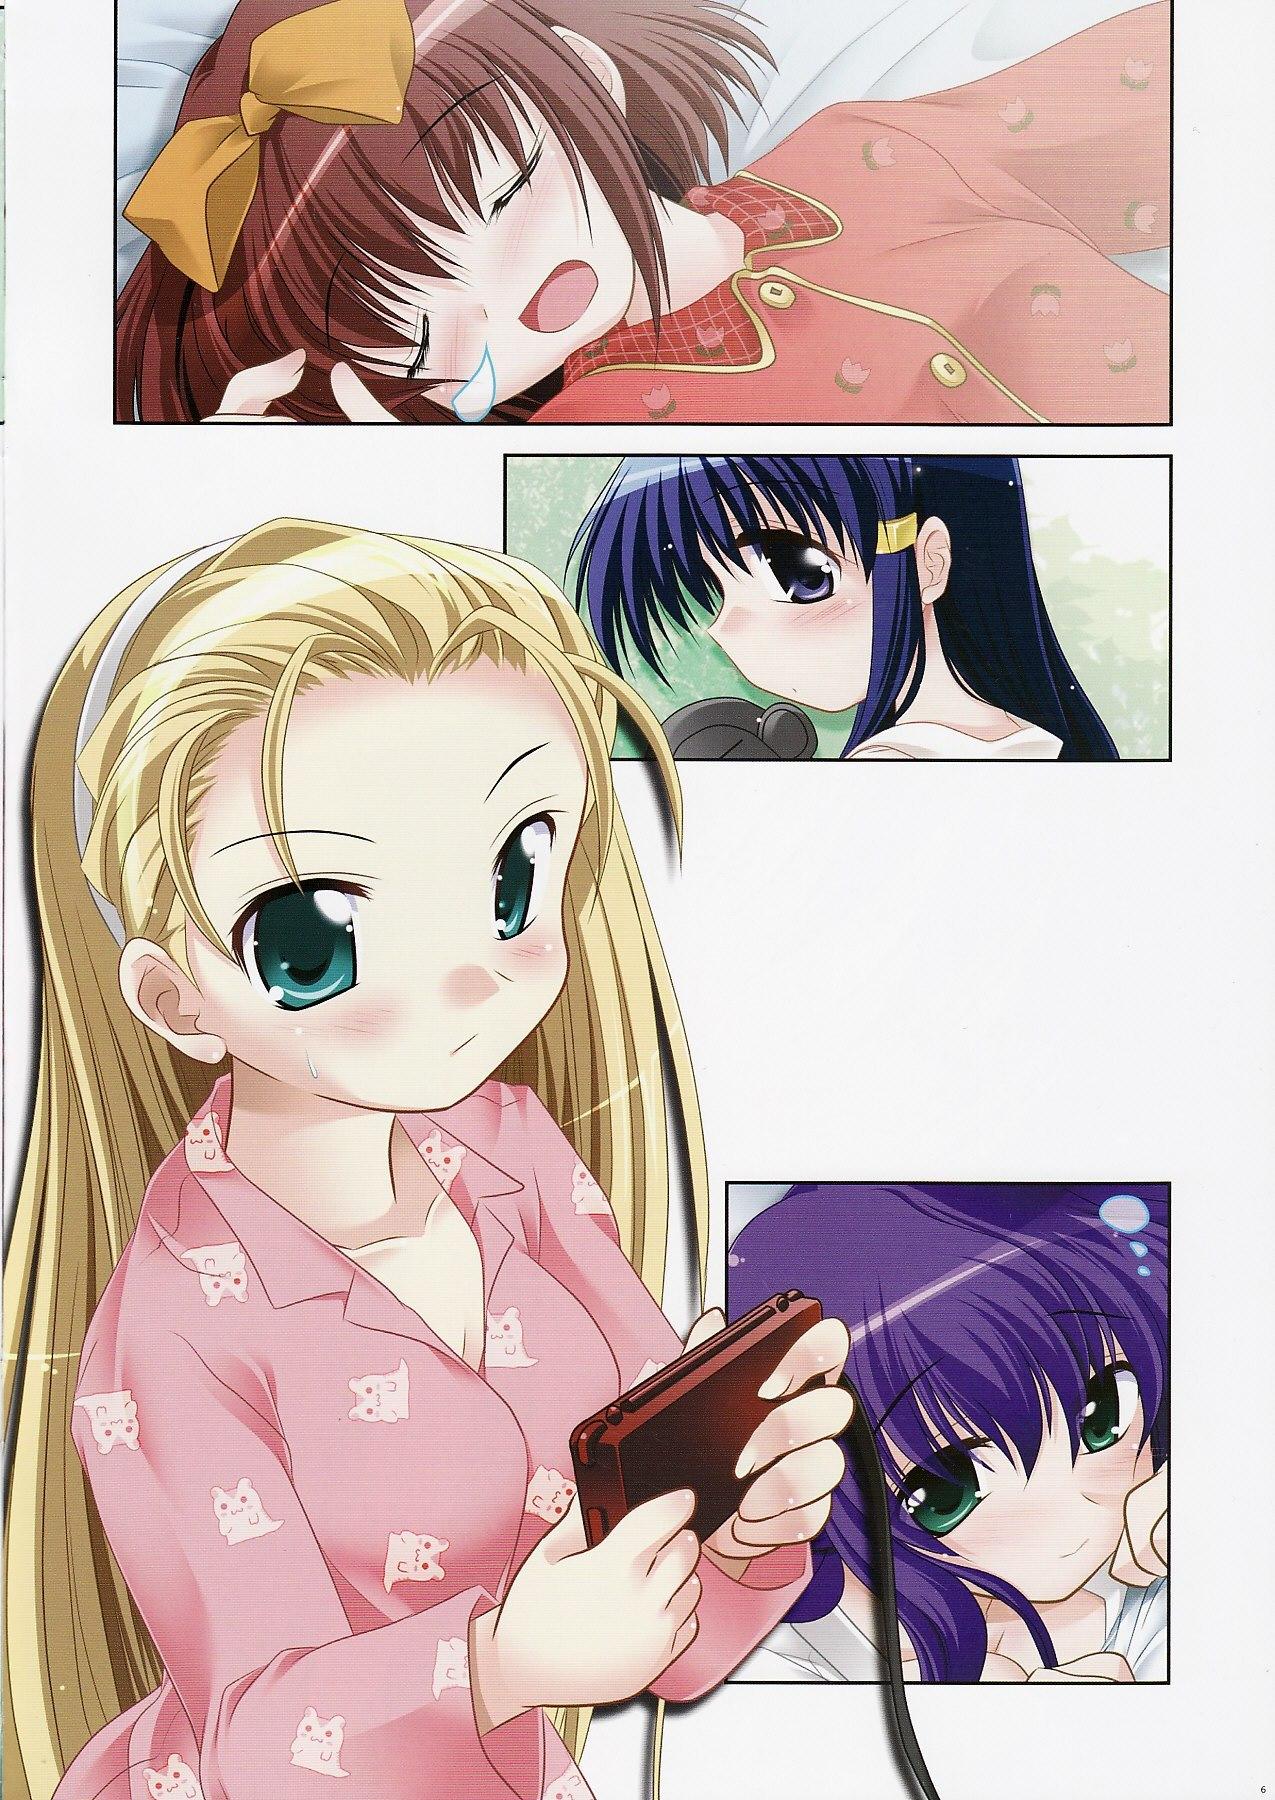 Verga Purimo#4 - Kanon Clannad Little busters Free - Page 7